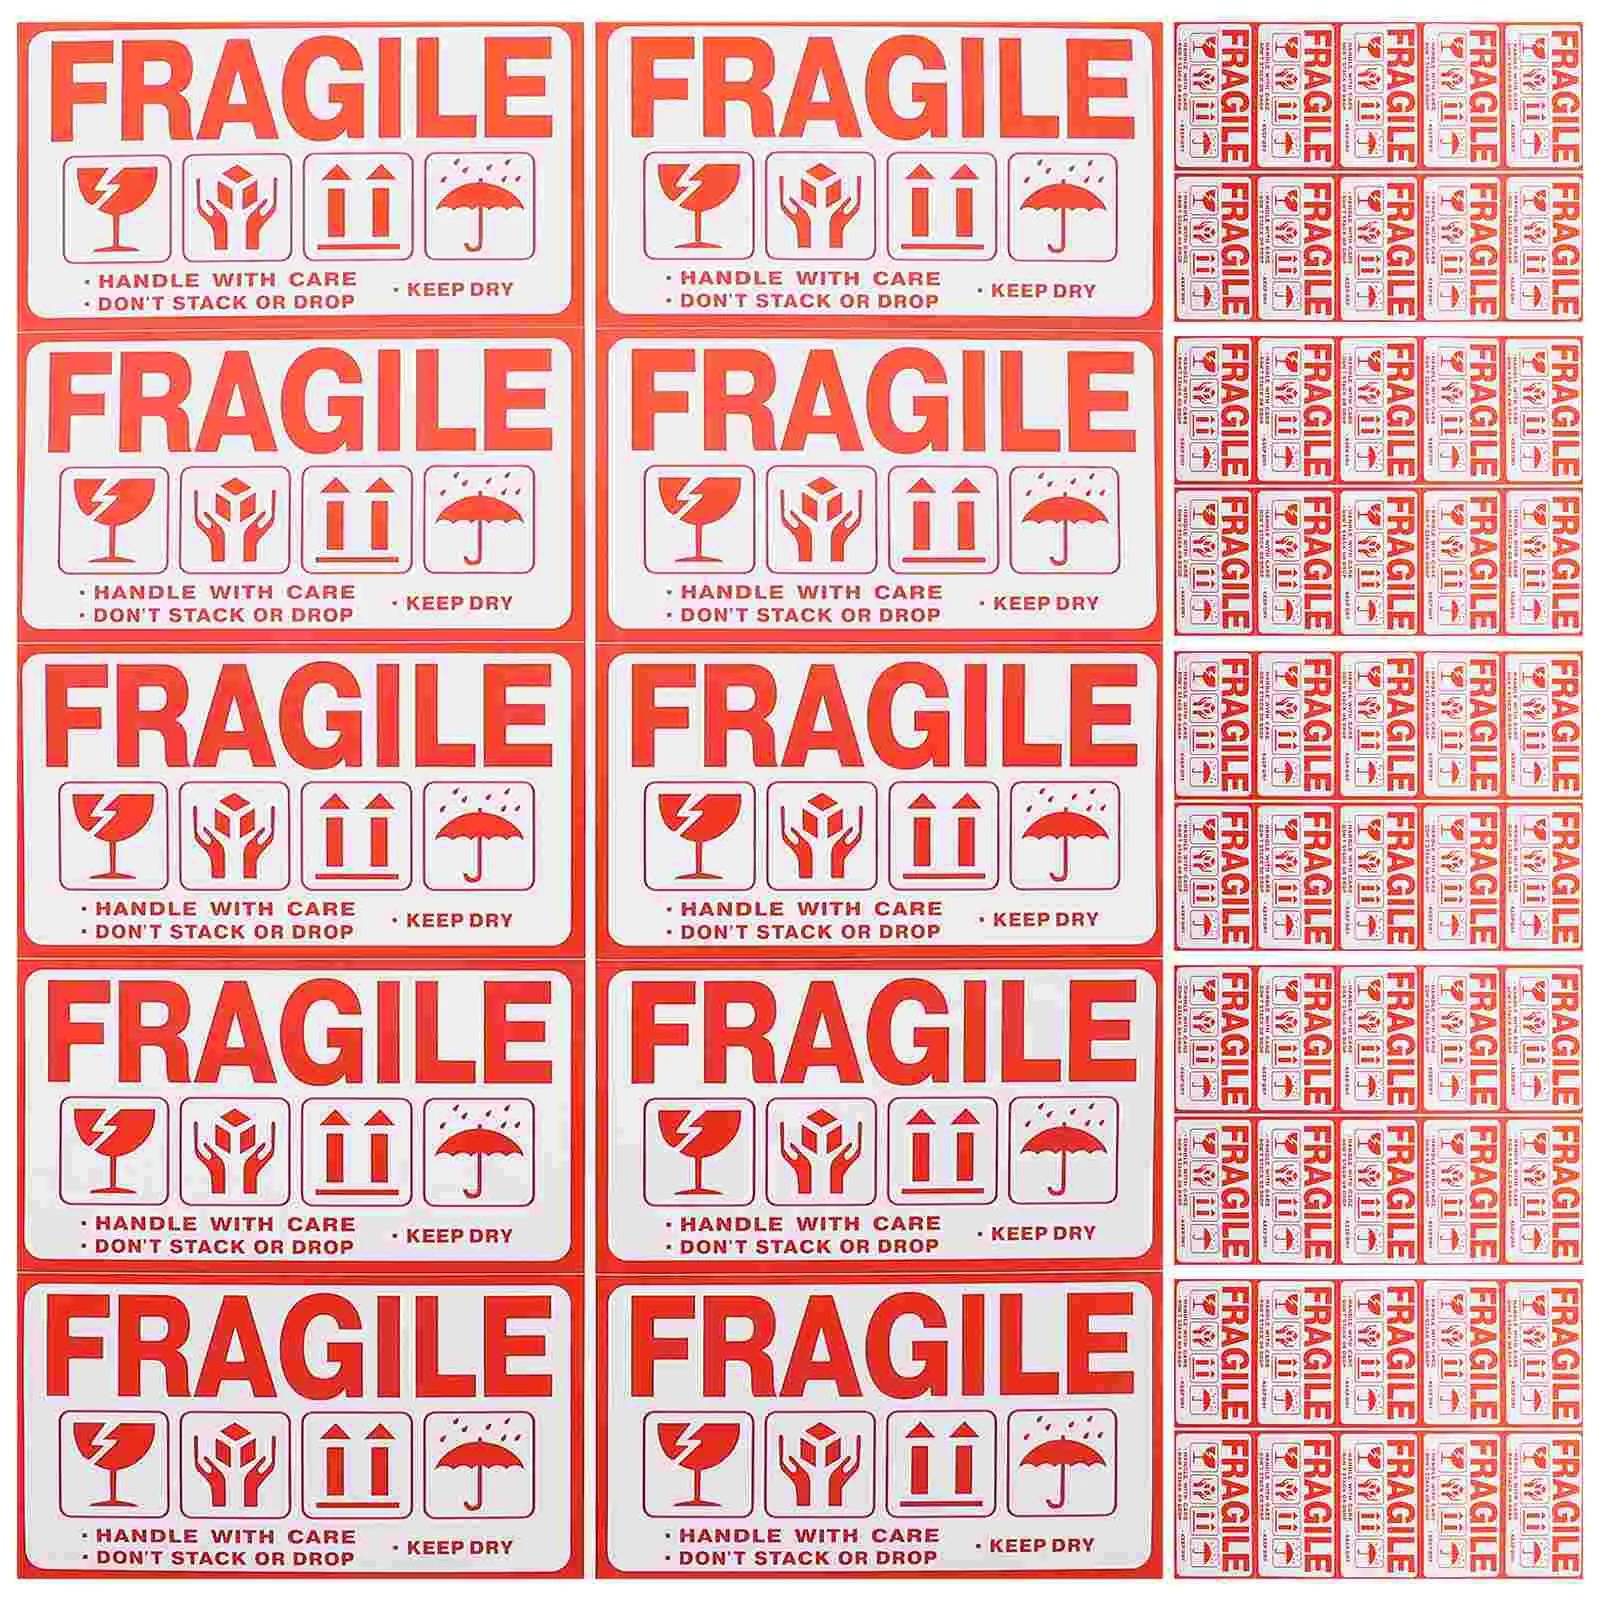 

20 Sheets Adhesive Stickers Shipping Fragile Caution Warning Label Careful Removable Copperplate Labels